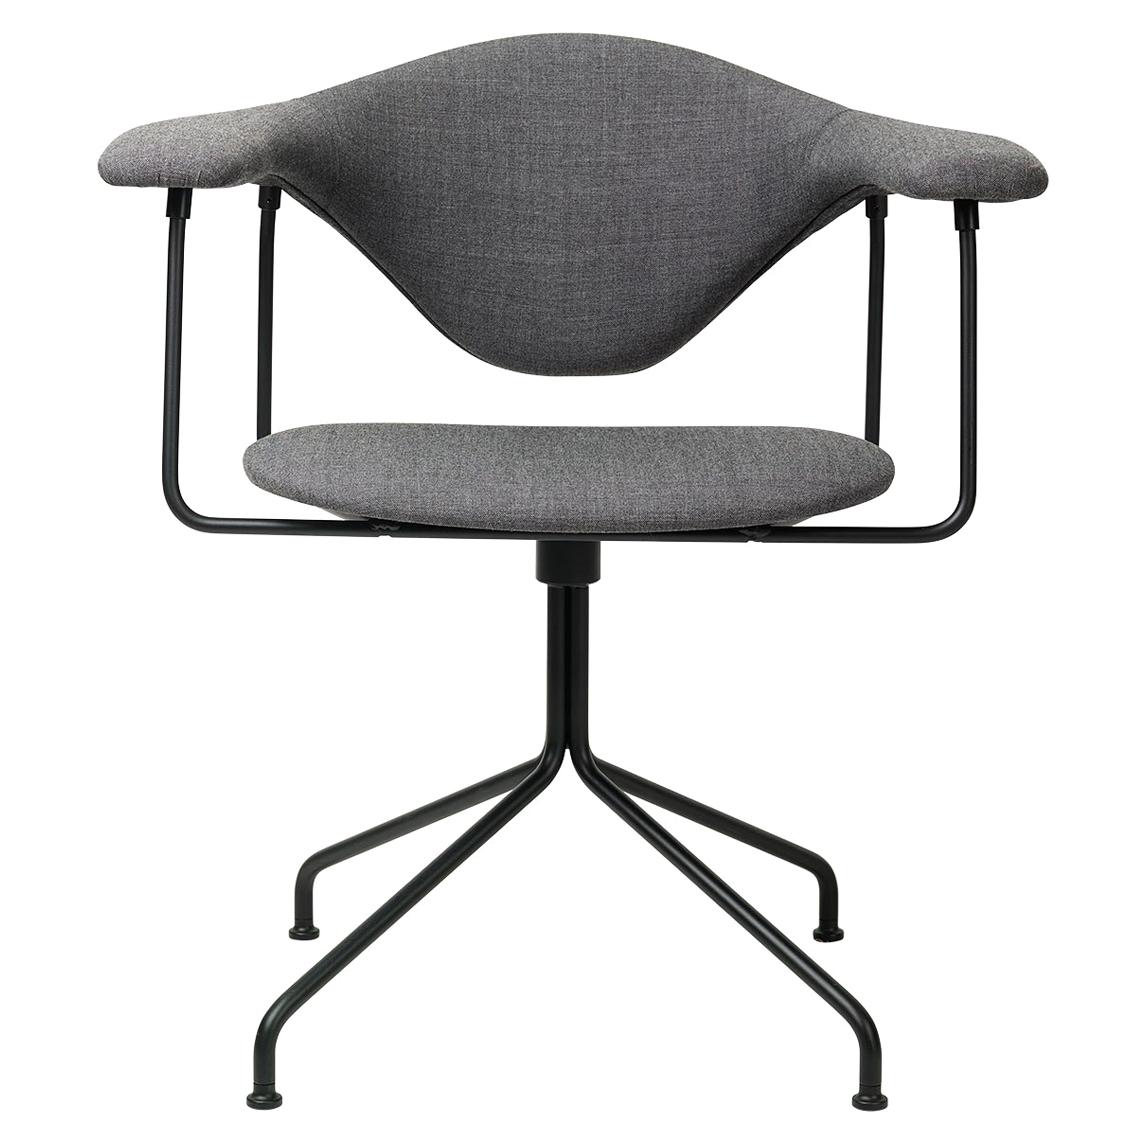 Masculo Meeting Chair, Fully Upholstered, Swivel Base